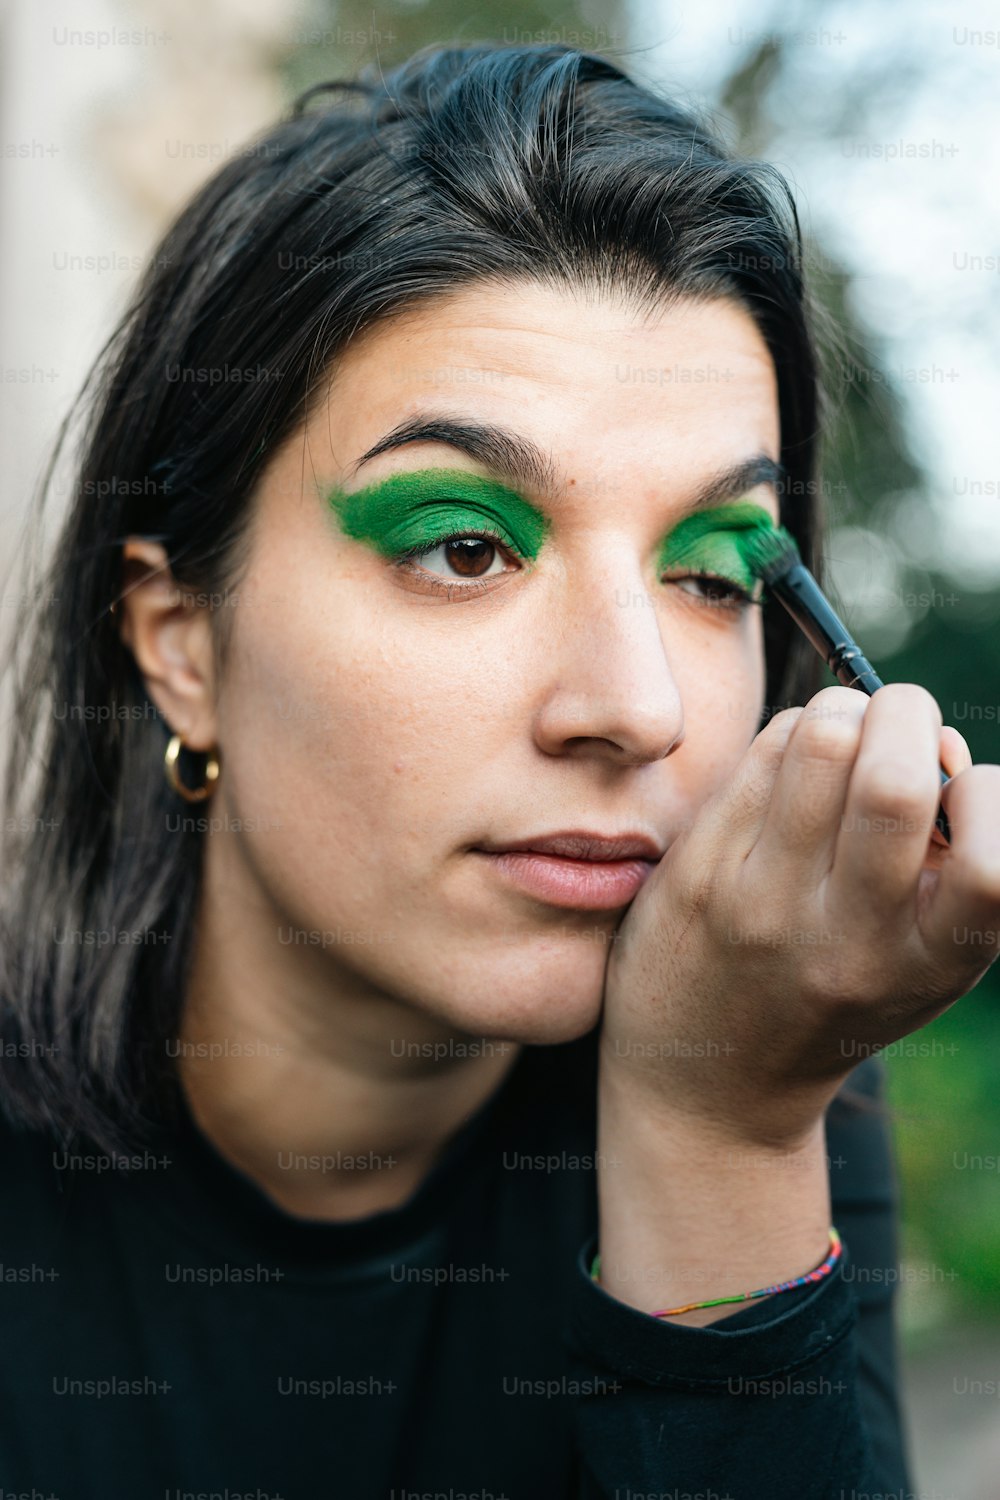 a woman with green eyeliners and a black shirt